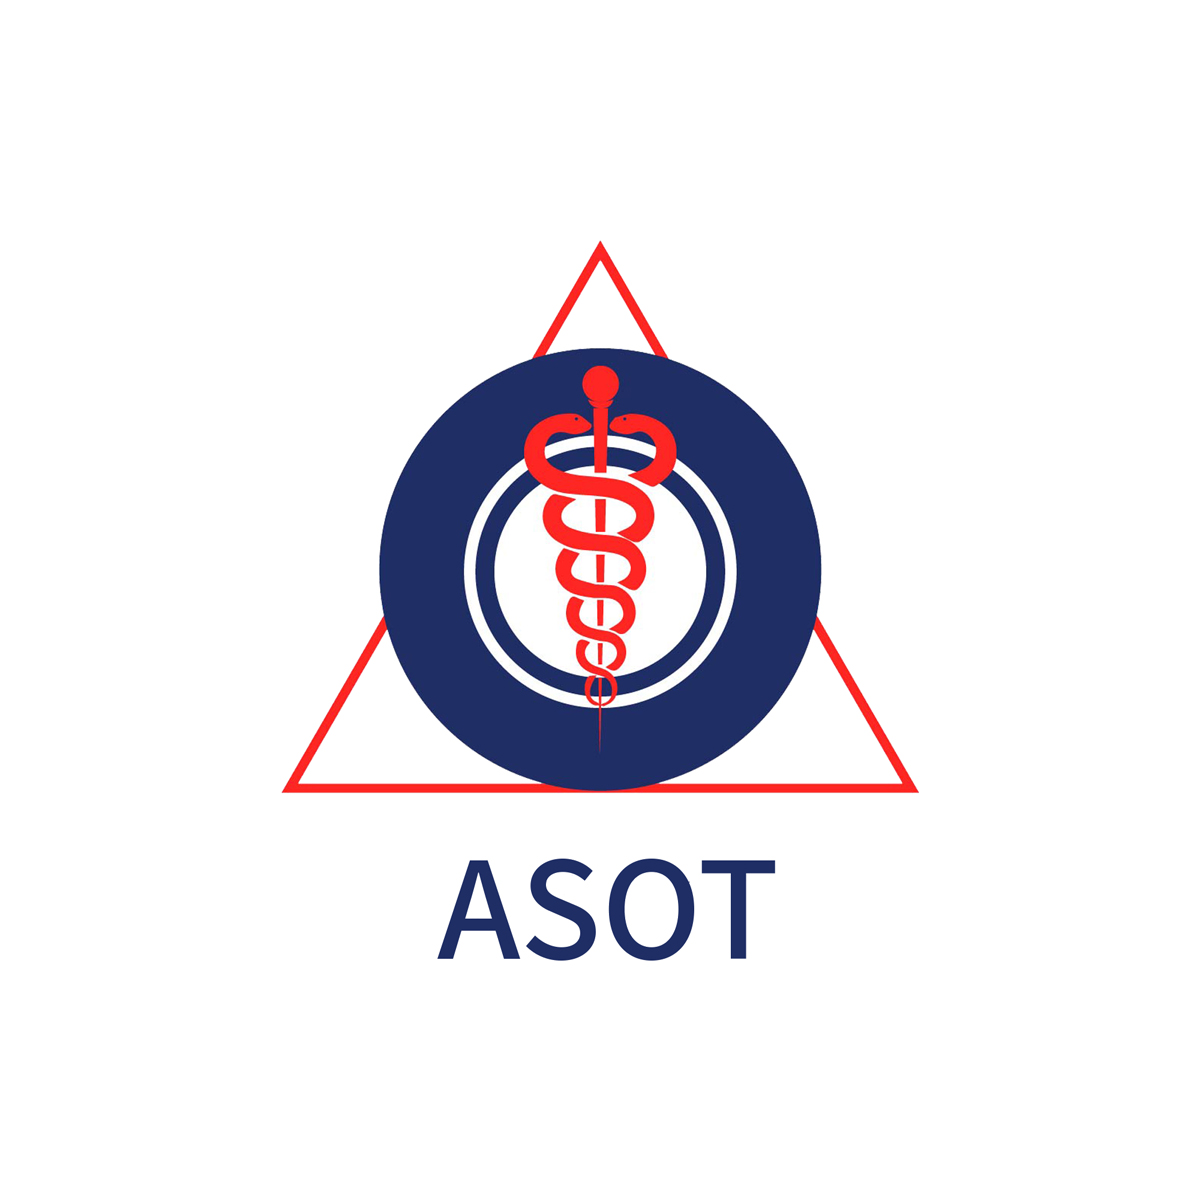 Logo of the American Society of Ophthalmic Trauma